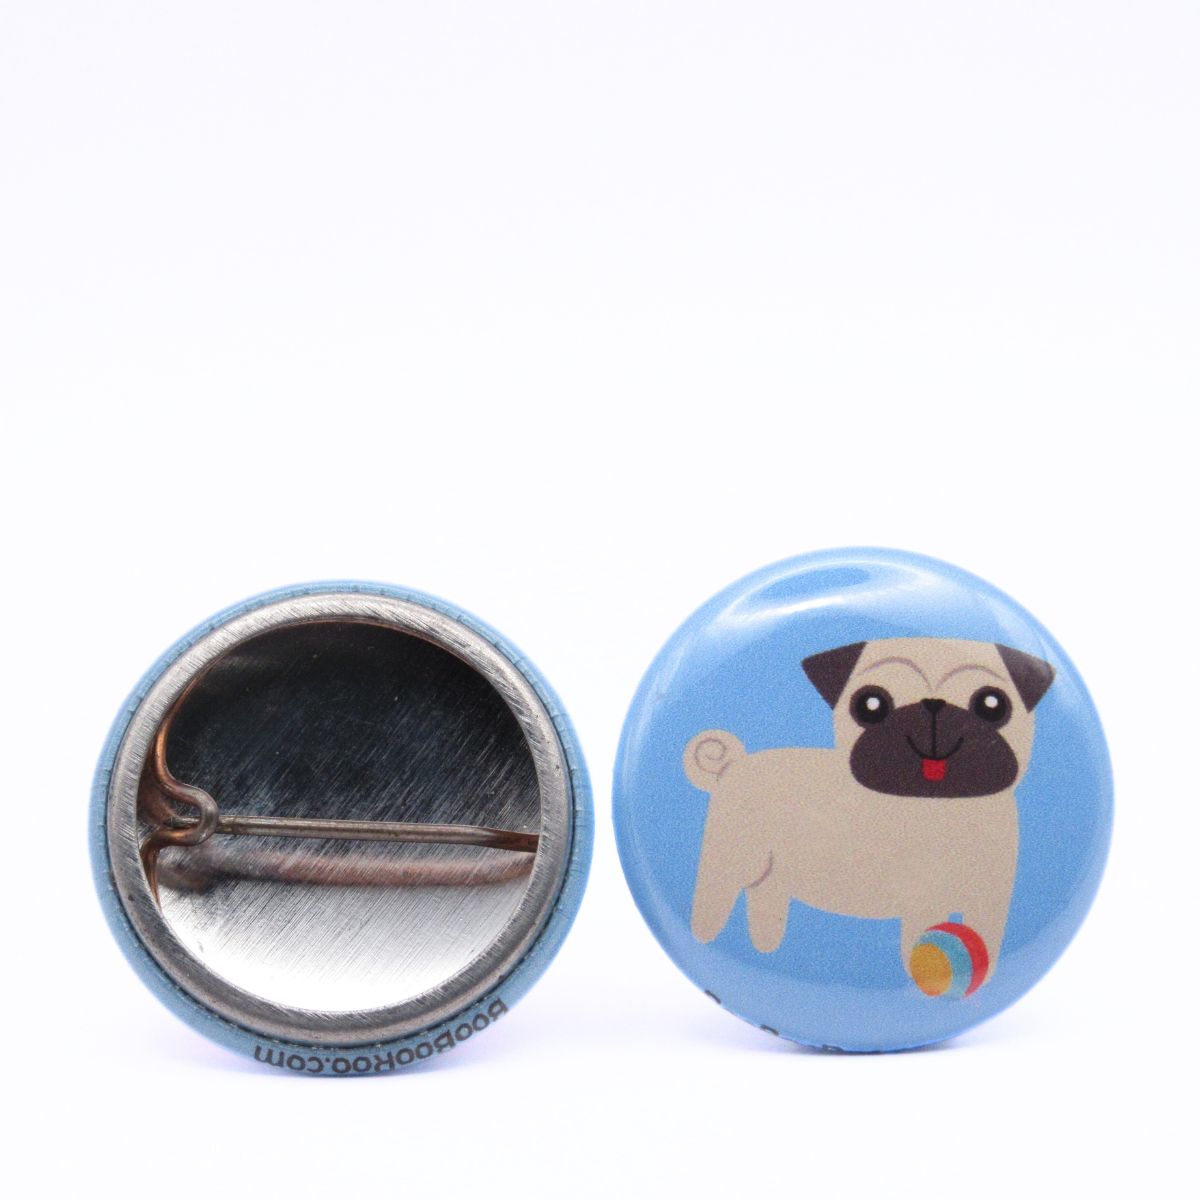 BooBooRoo Pinback Button (i.e. button, badge, pin) of a cute pug with its tongue out and a small ball in front of it. Image showing front and back of high-quality metal button.